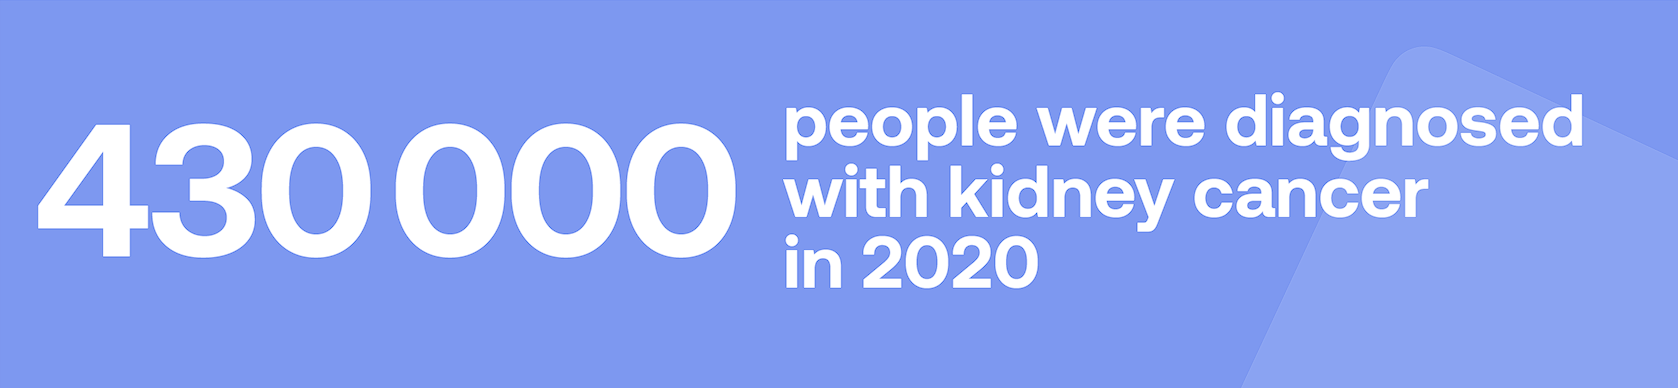 430000 people were diagnosed with kidney cancer in 2020